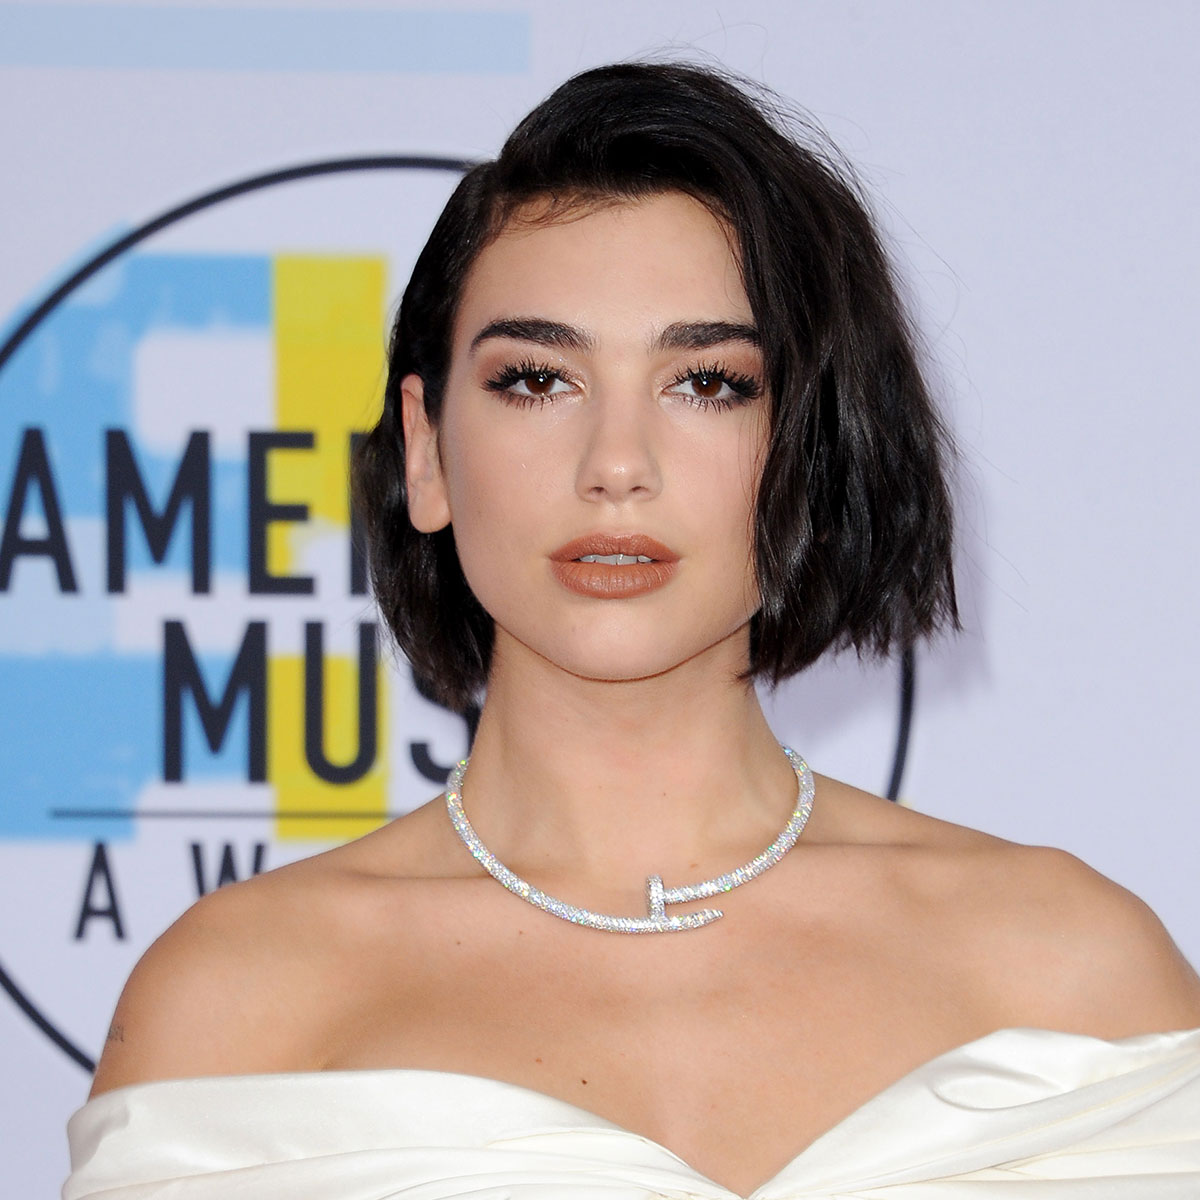 Dua Lipa Stuns Instagram Followers In Black Leather Pants And Matching Top  While Visiting Madrid - SHEfinds